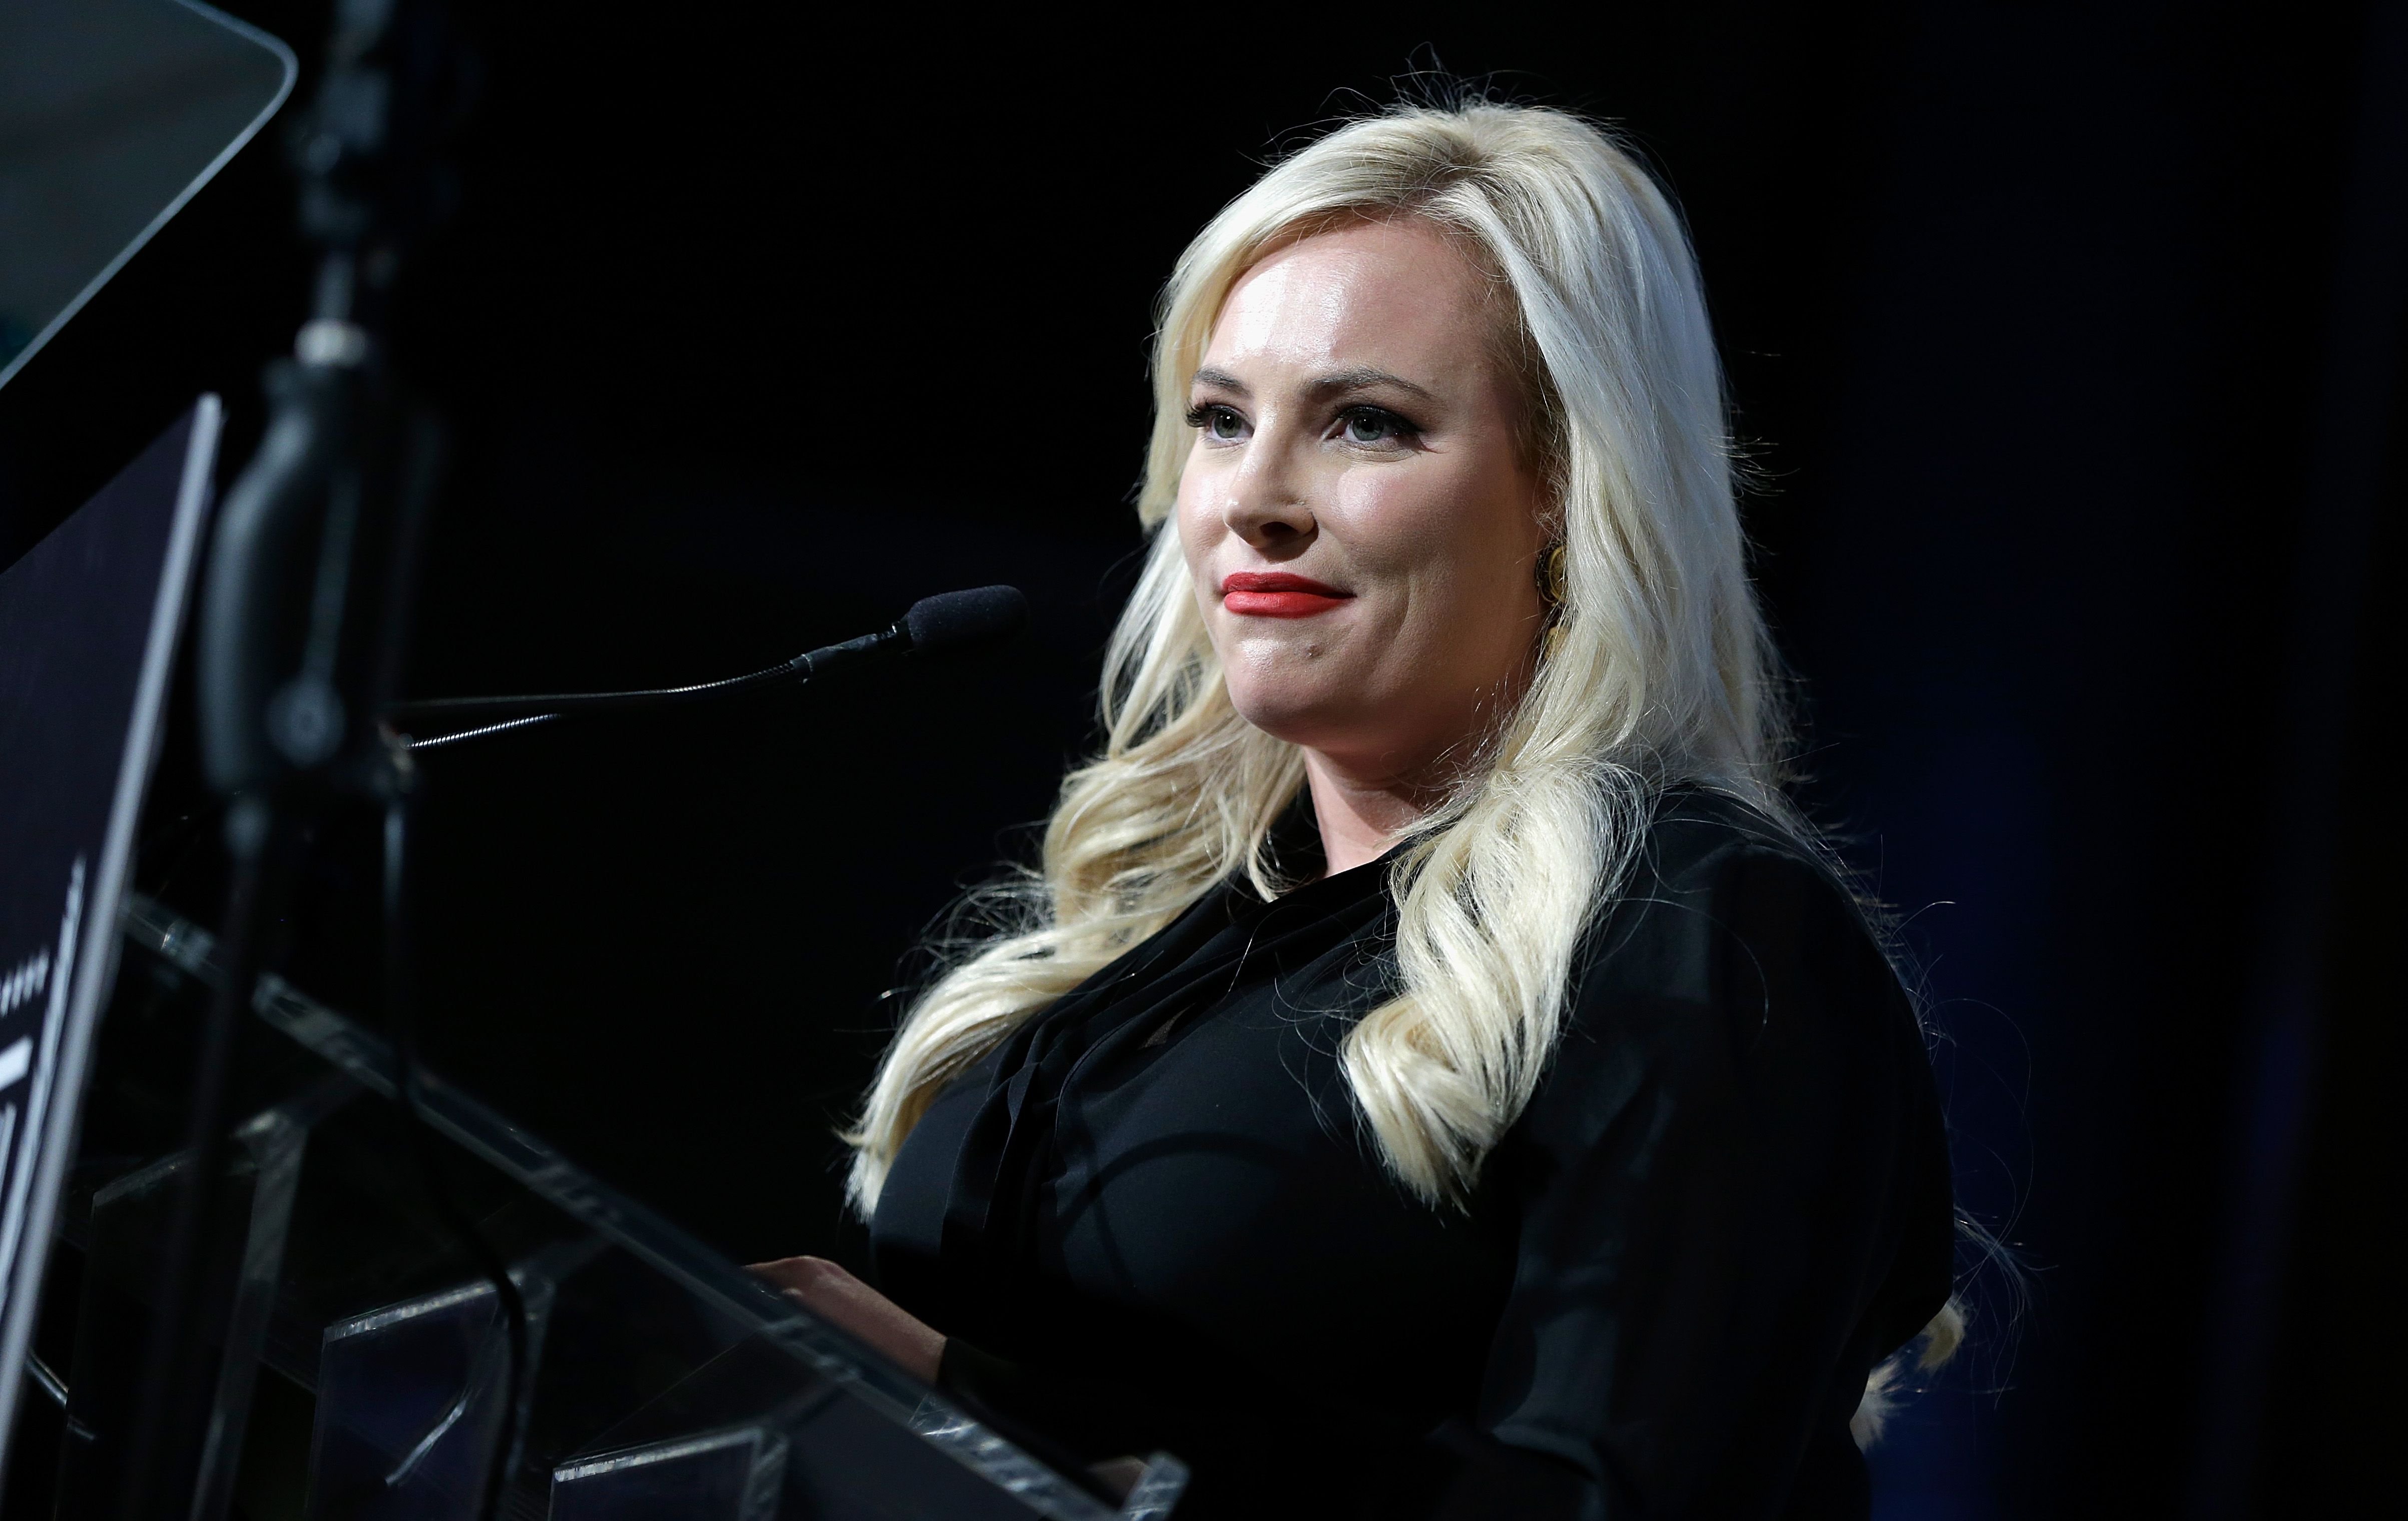 Meghan McCain at 11th Annual IAVA Heroes Gala at Cipriani 42nd Street on November 9, 2017, in New York City | Photo: John Lamparski/WireImage/Getty Images